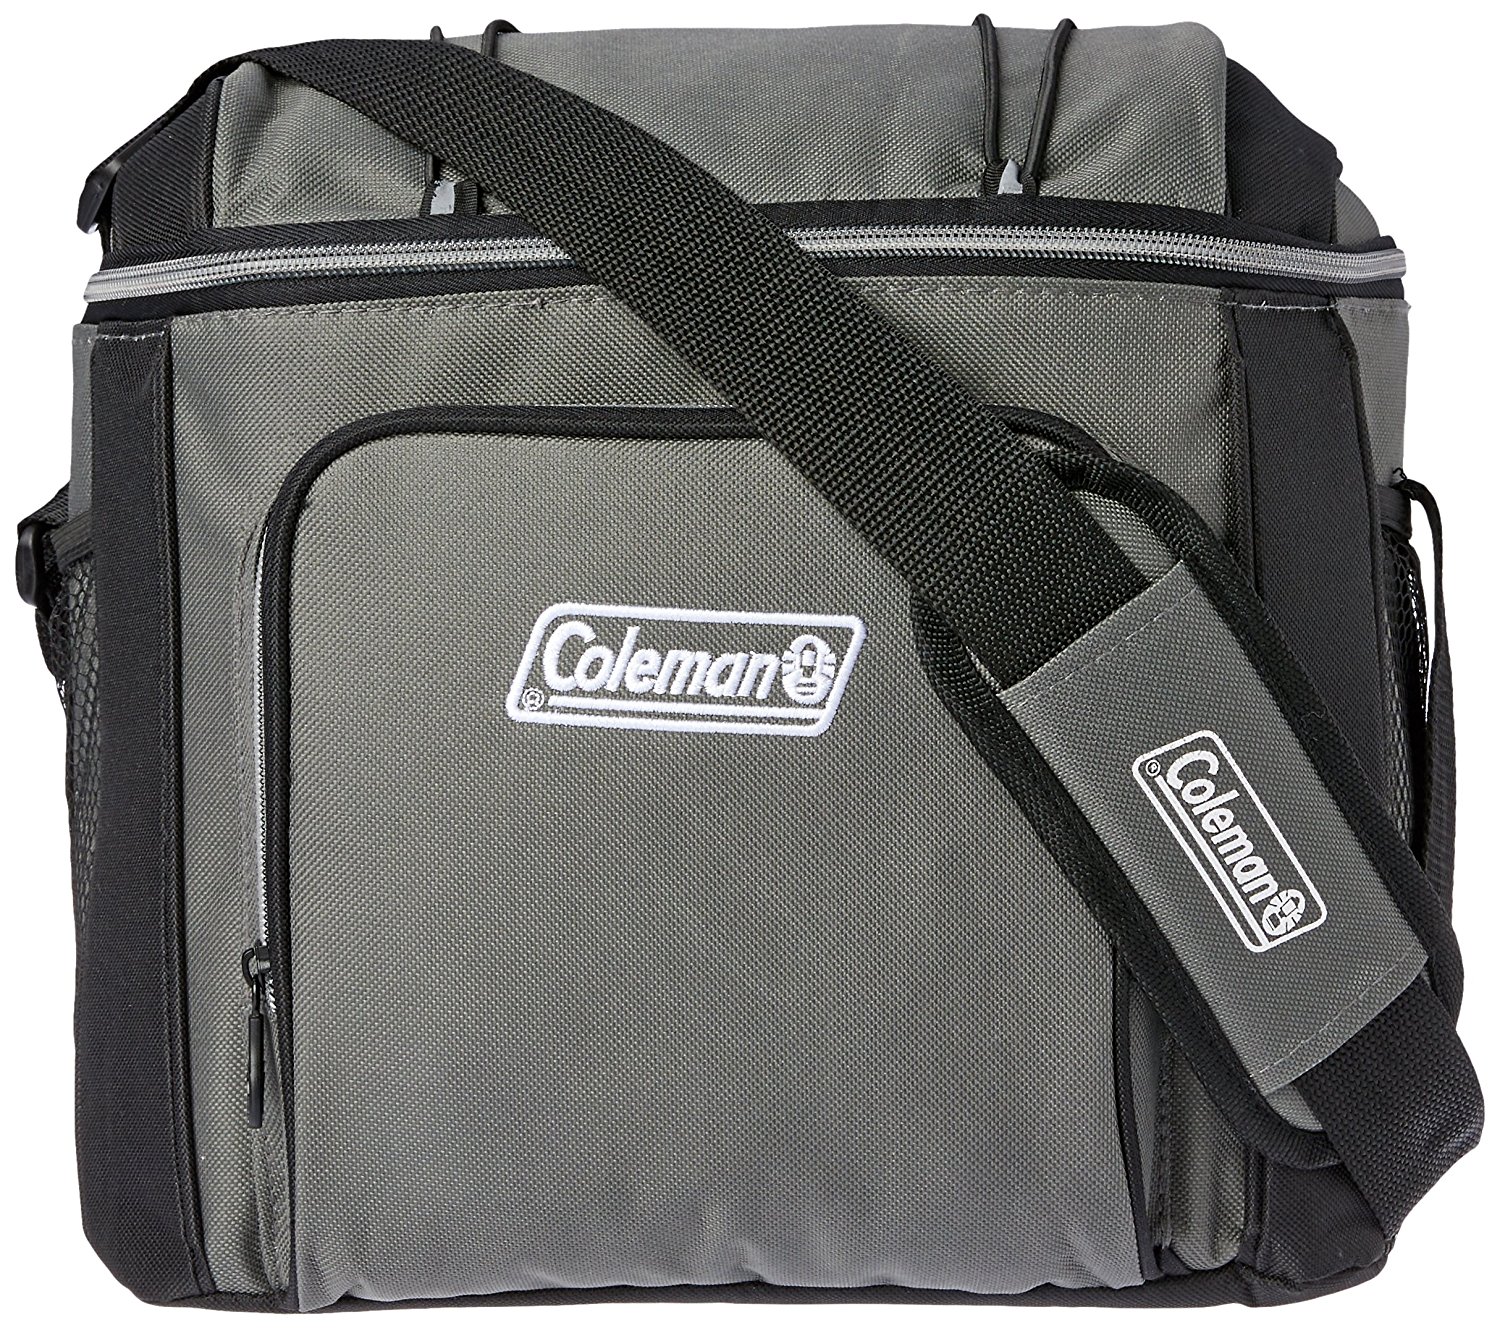 Coleman 16-Can Soft Cooler With Hard Liner Only $13.34! (Reg. $18.99)